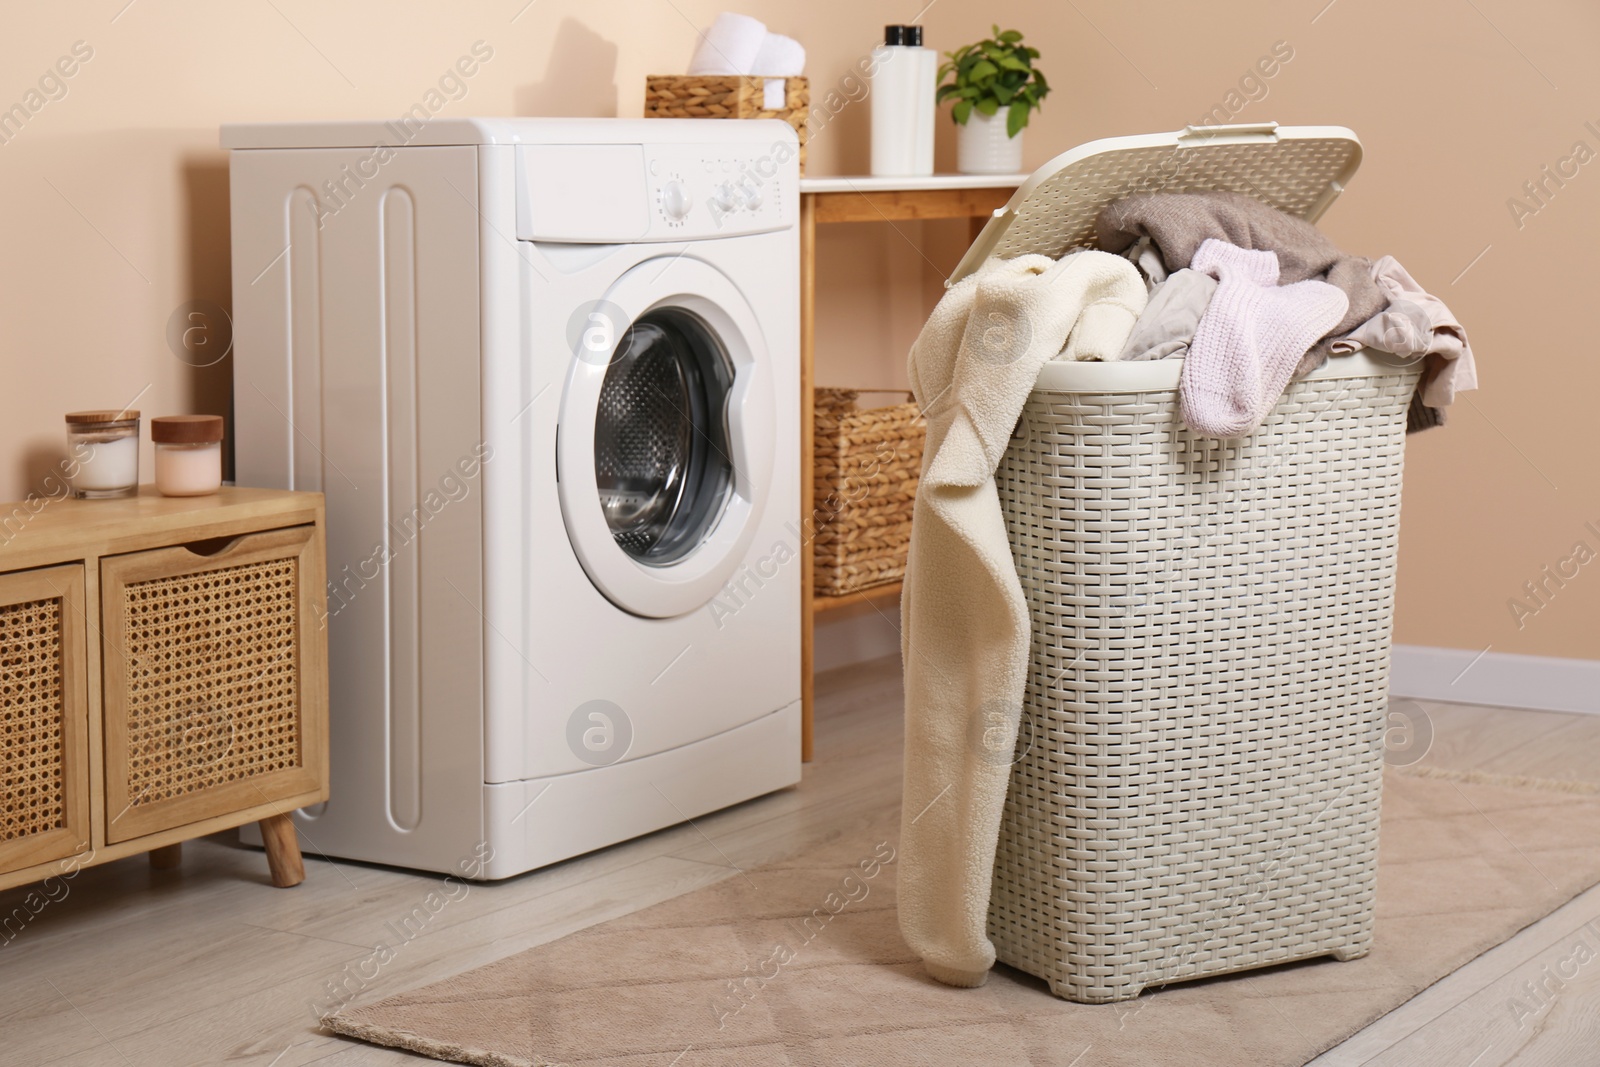 Photo of Laundry basket overfilled with clothes near washing machine in bathroom